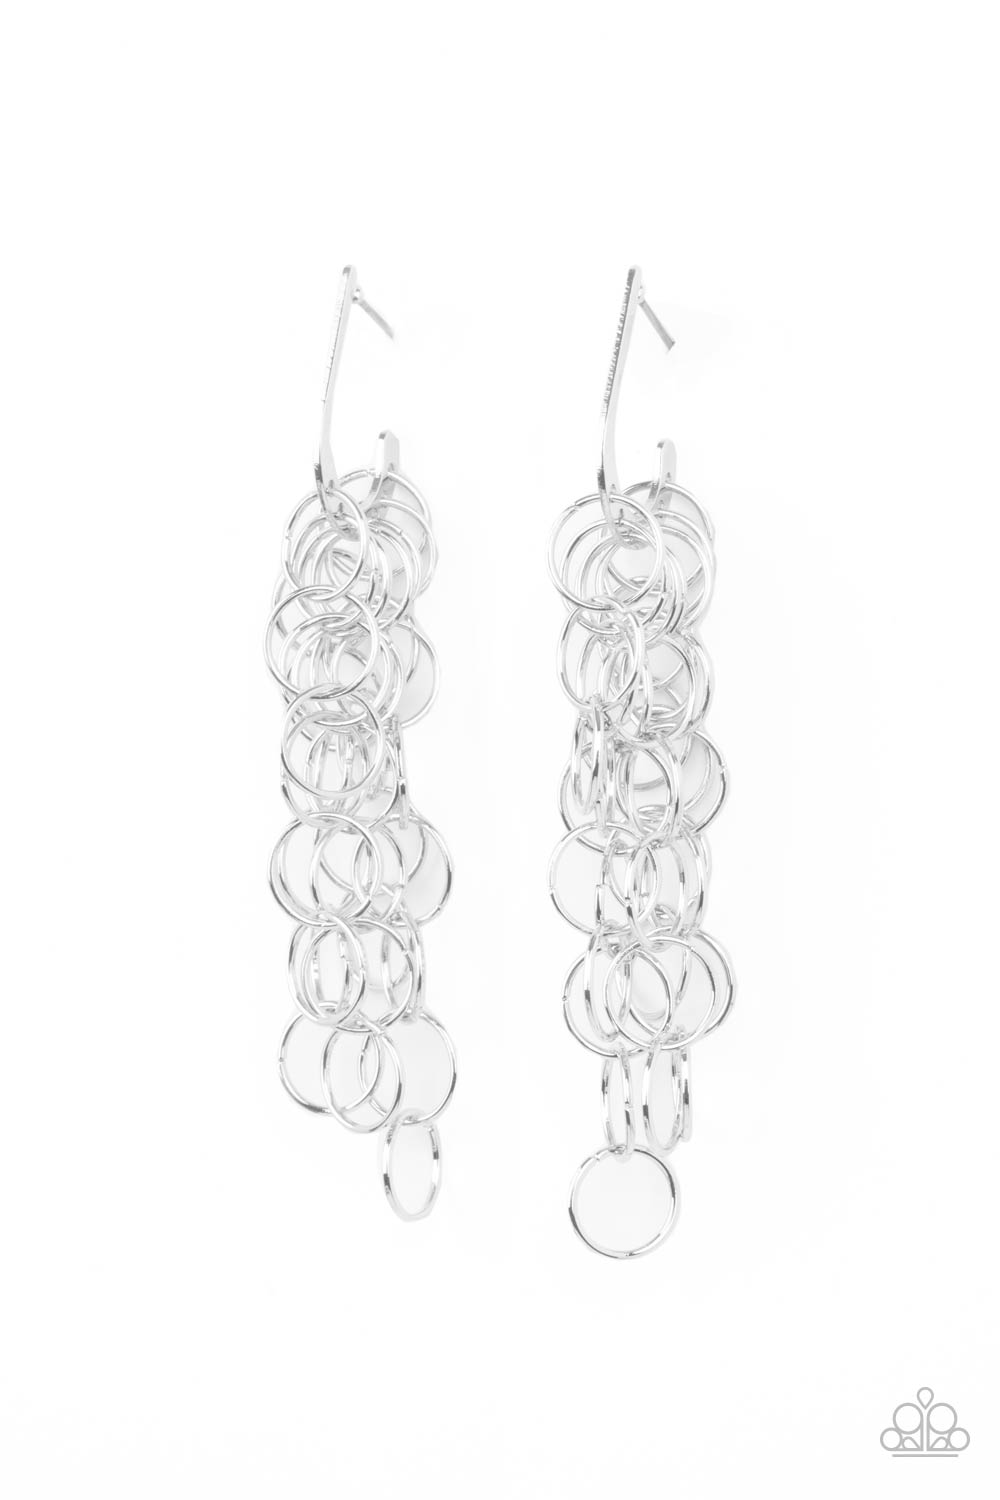 Long Live The Rebels Silver Earring - Paparazzi Accessories.  Strands of shiny silver links cascade from the bottom of a dainty hook shaped hoop, creating a rebellious fringe. Hoop measures approximately 1/2" in diameter. Earring attaches to a standard post fitting.  ﻿﻿﻿All Paparazzi Accessories are lead free and nickel free!  Sold as one pair of hoop earrings.